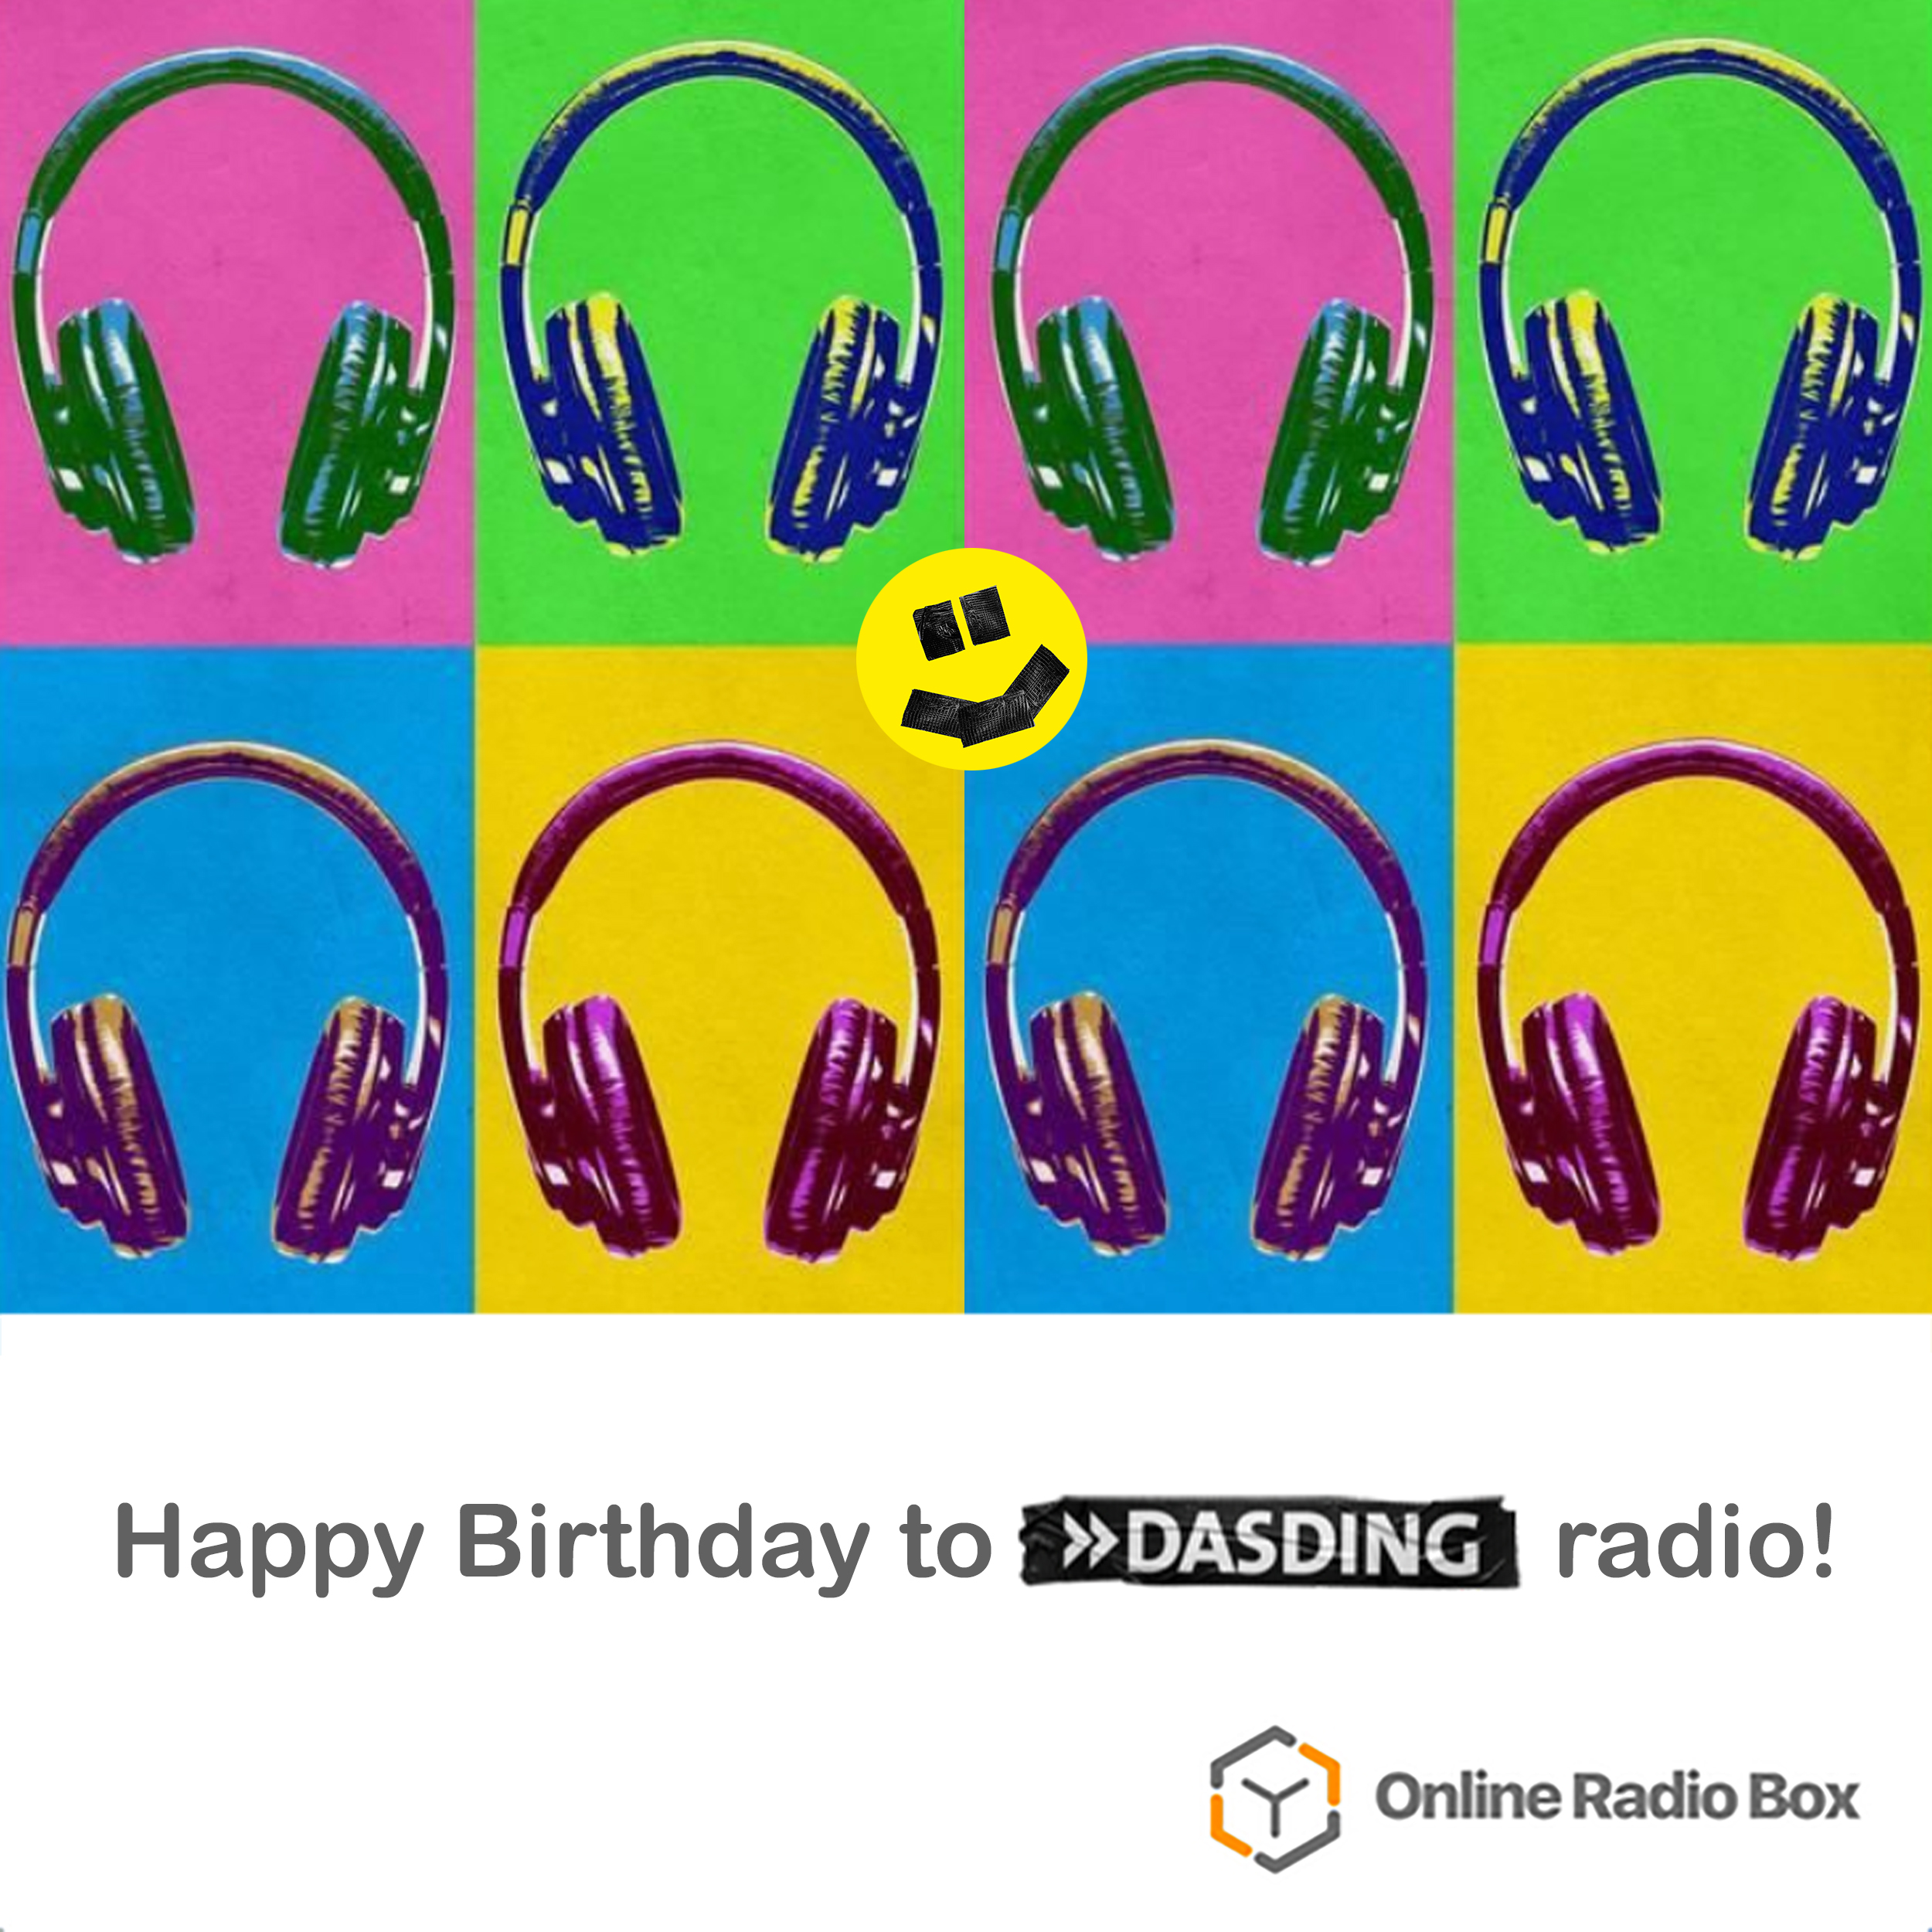 OnlineRadioBox on Twitter: "Congratulations to @DASDING radio station!  Today they are celebrating 23 years on air! 🥂🎉🎈 Best wishes from Online  Radio Box team! Guys, be happy and stay healthy! 🎂🎁🍾 Listen